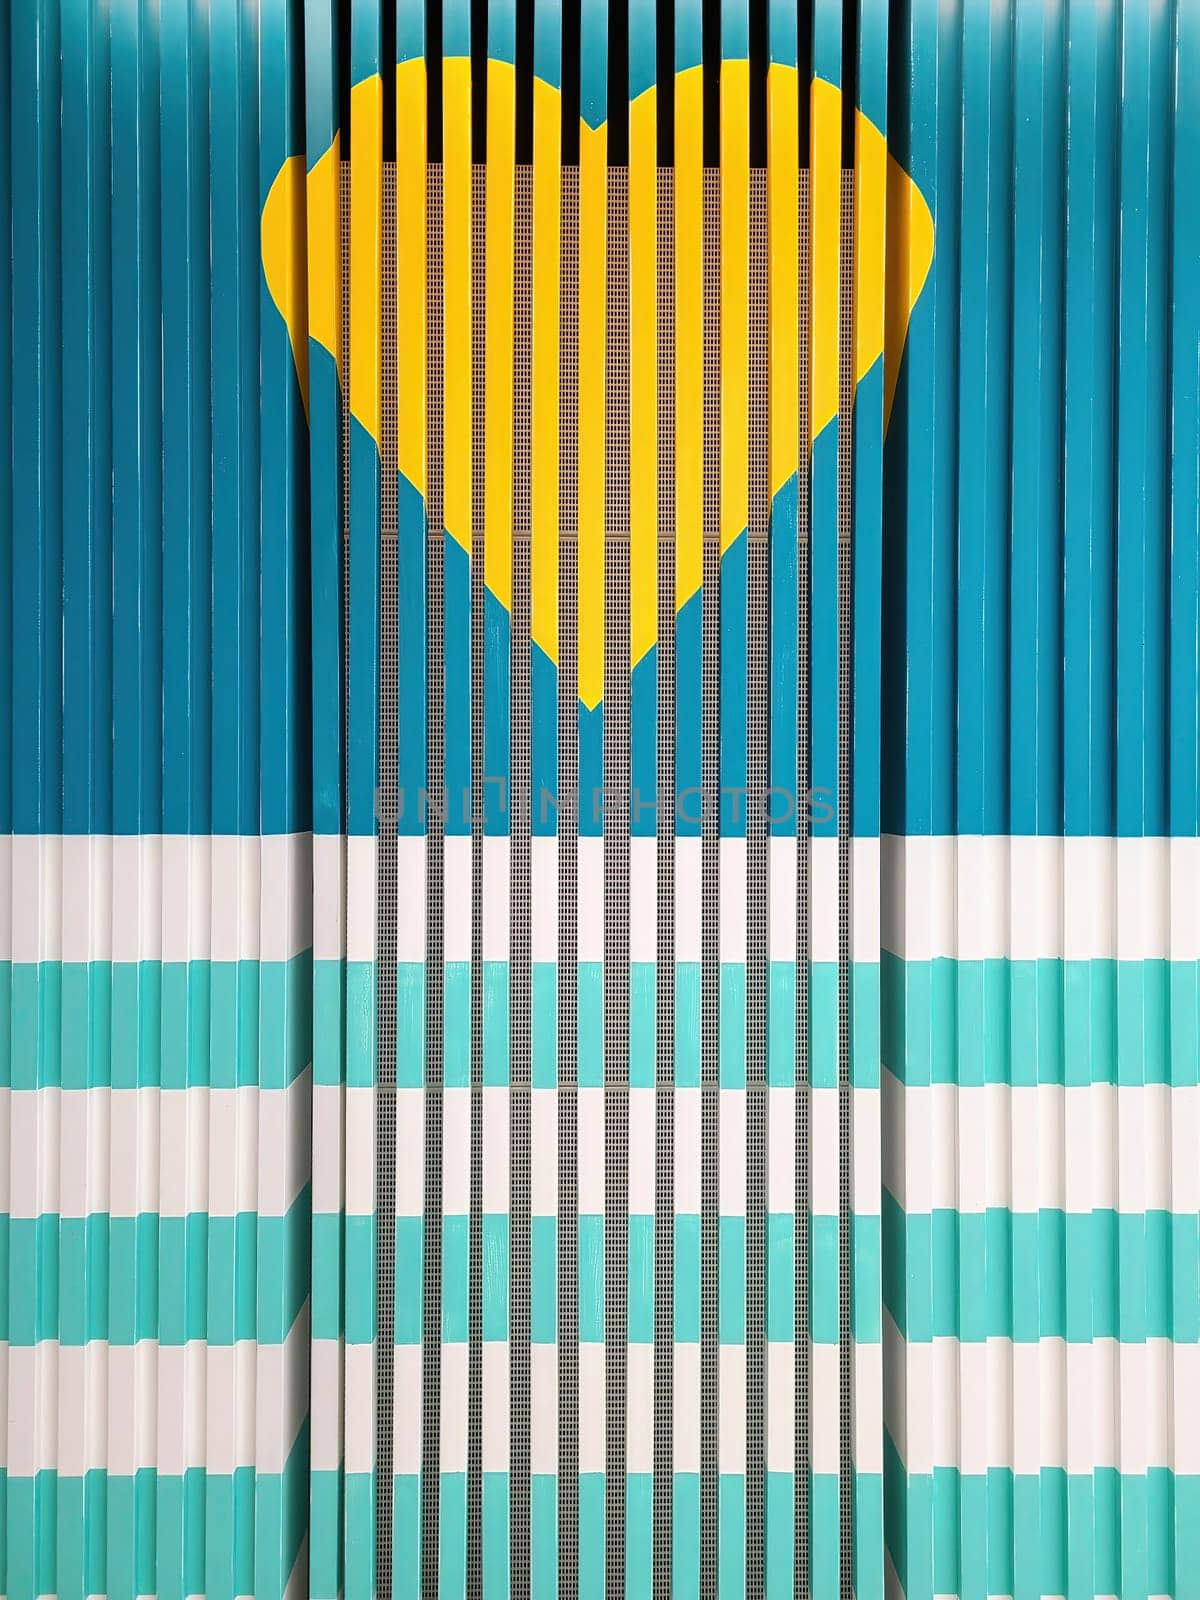 2023 abstract geometric design featuring a vibrant yellow heart centered on turquoise and blue stripes, symbolizing love within a structured environment, photographed in San Francisco, California.